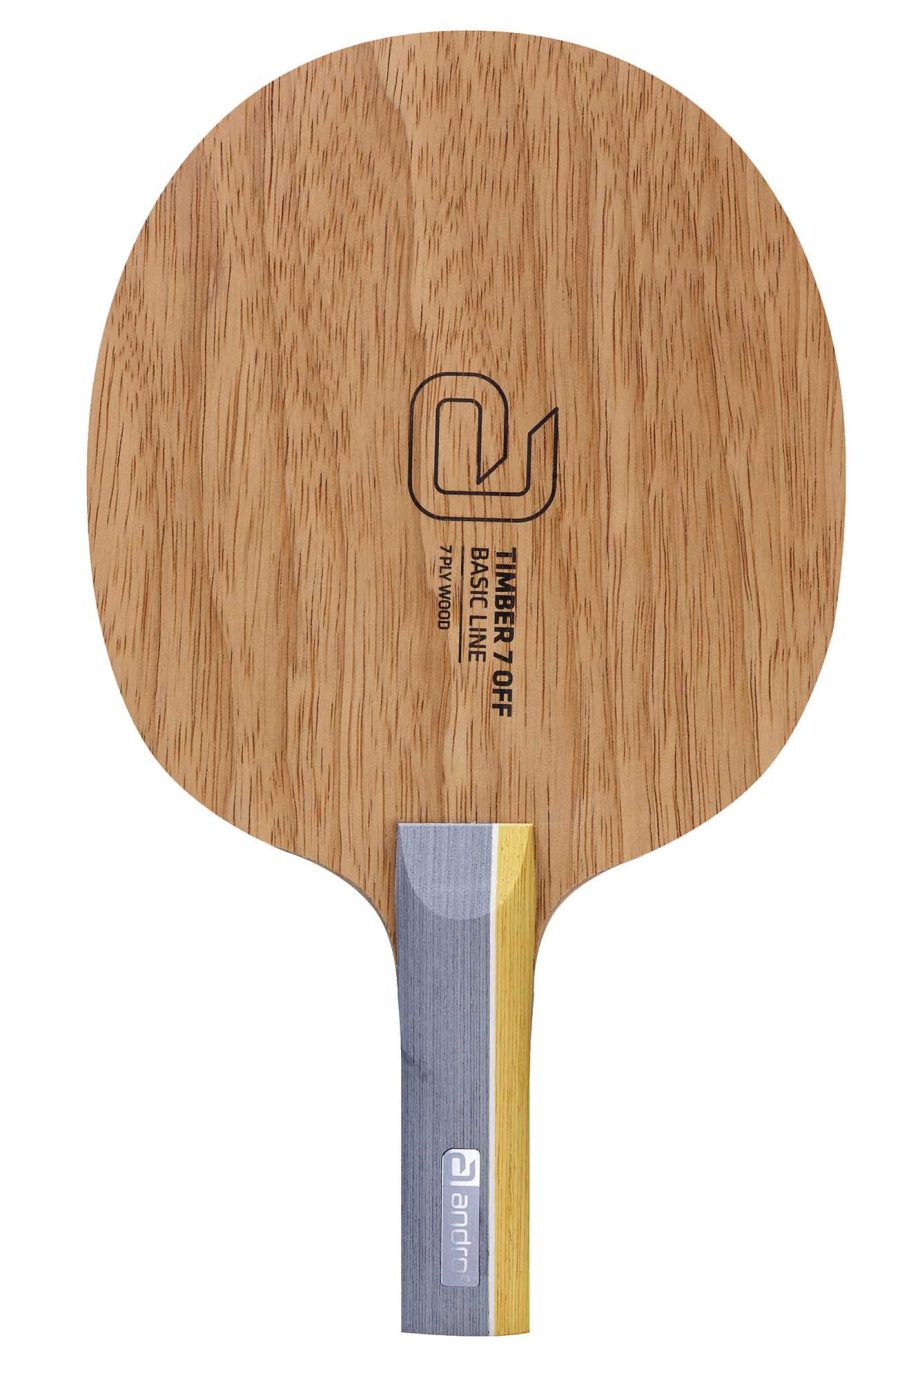 Andro Timber 7 OFF table tennis blade